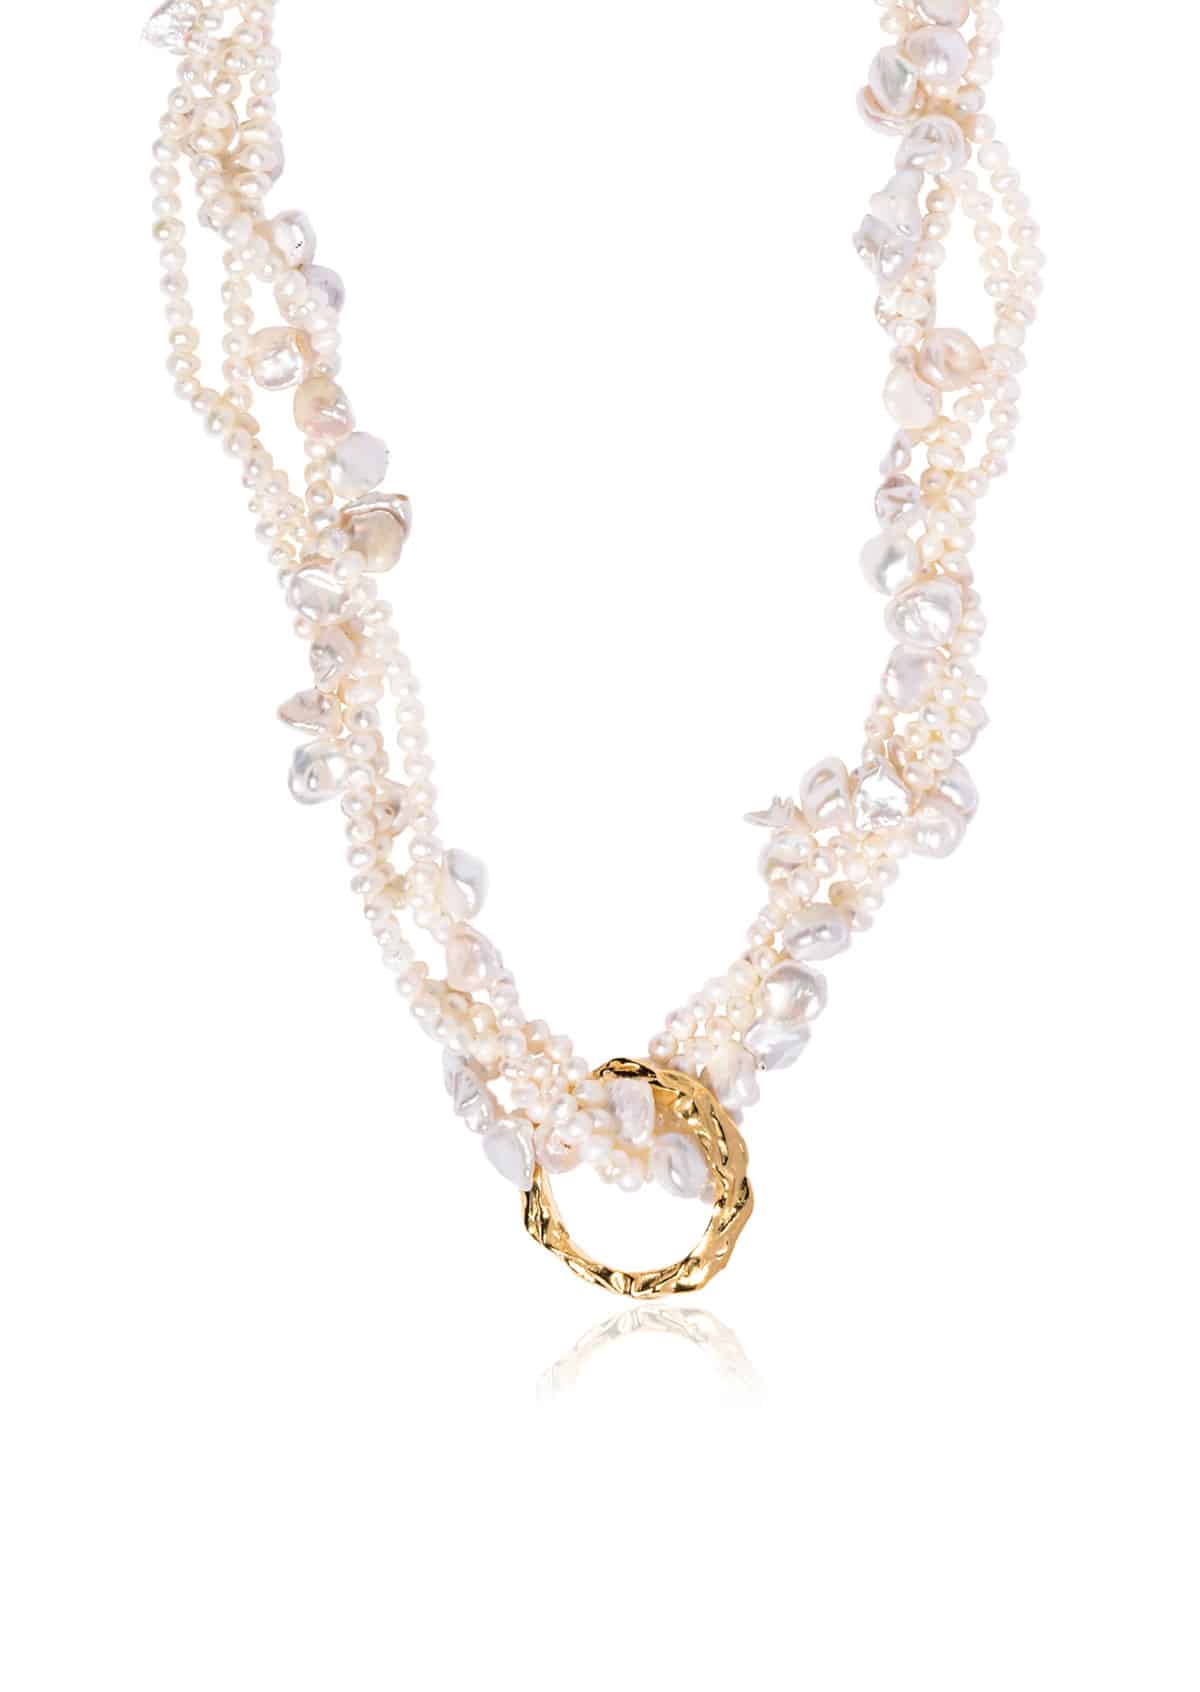 Full Moon Tangled Pearl Necklace - Hermina Athens